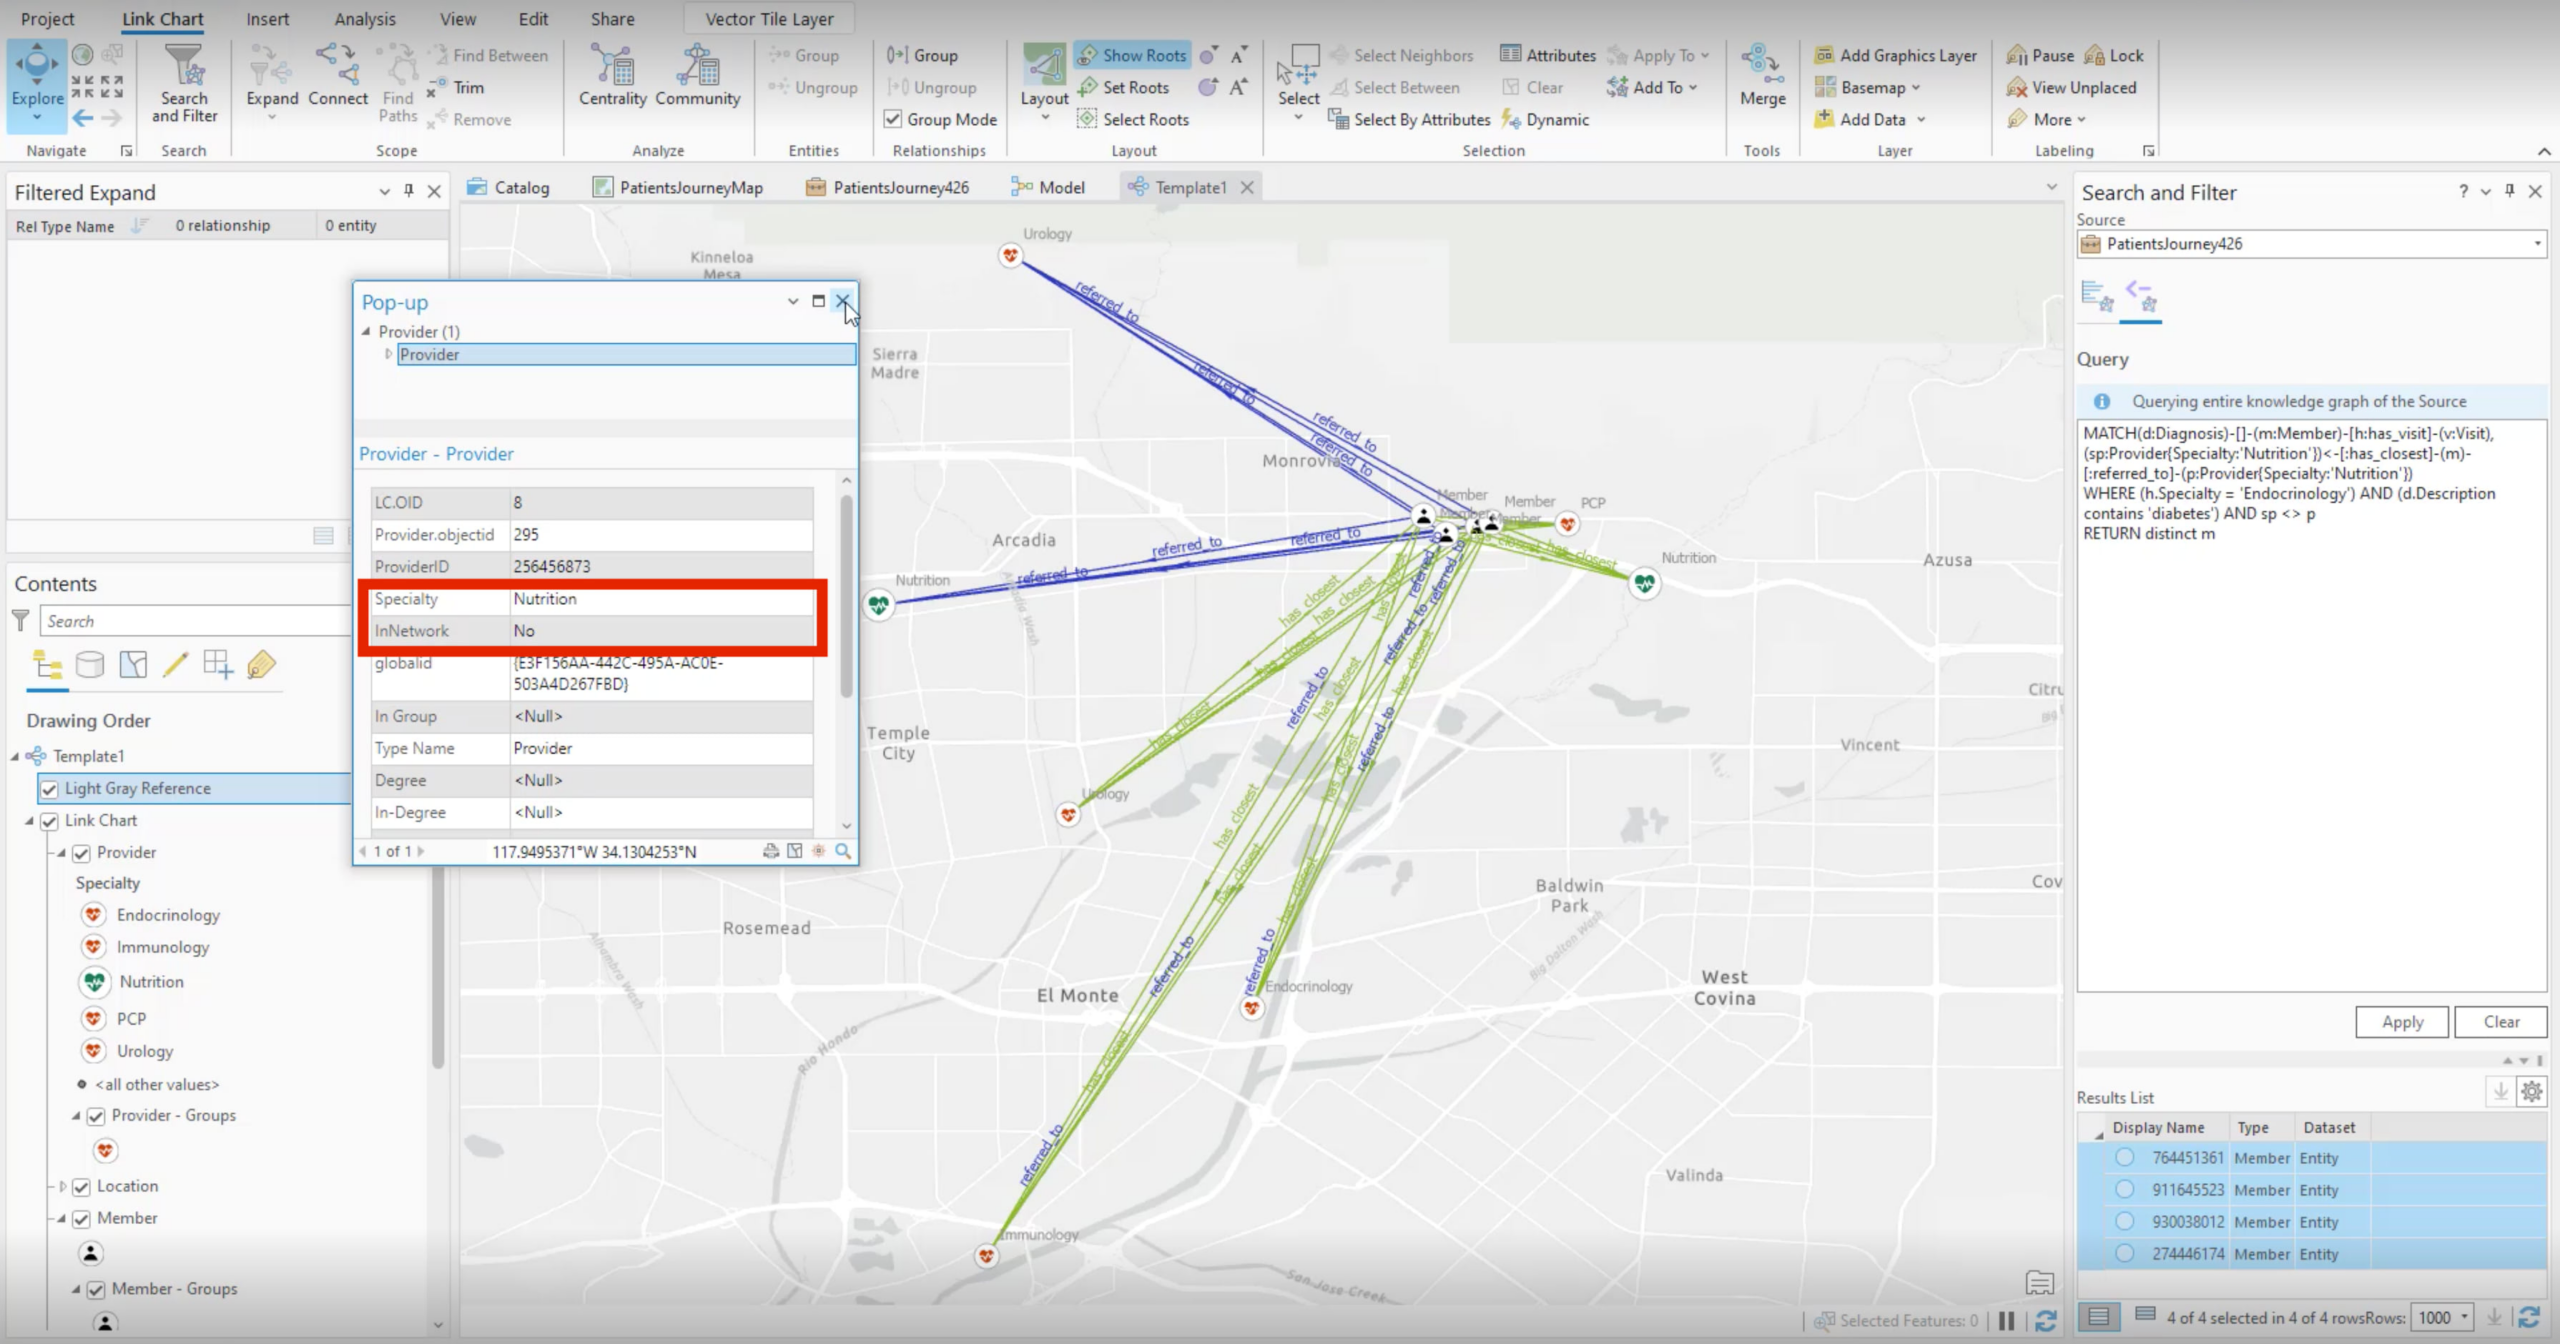 Query of ArcGIS Knowledge graph